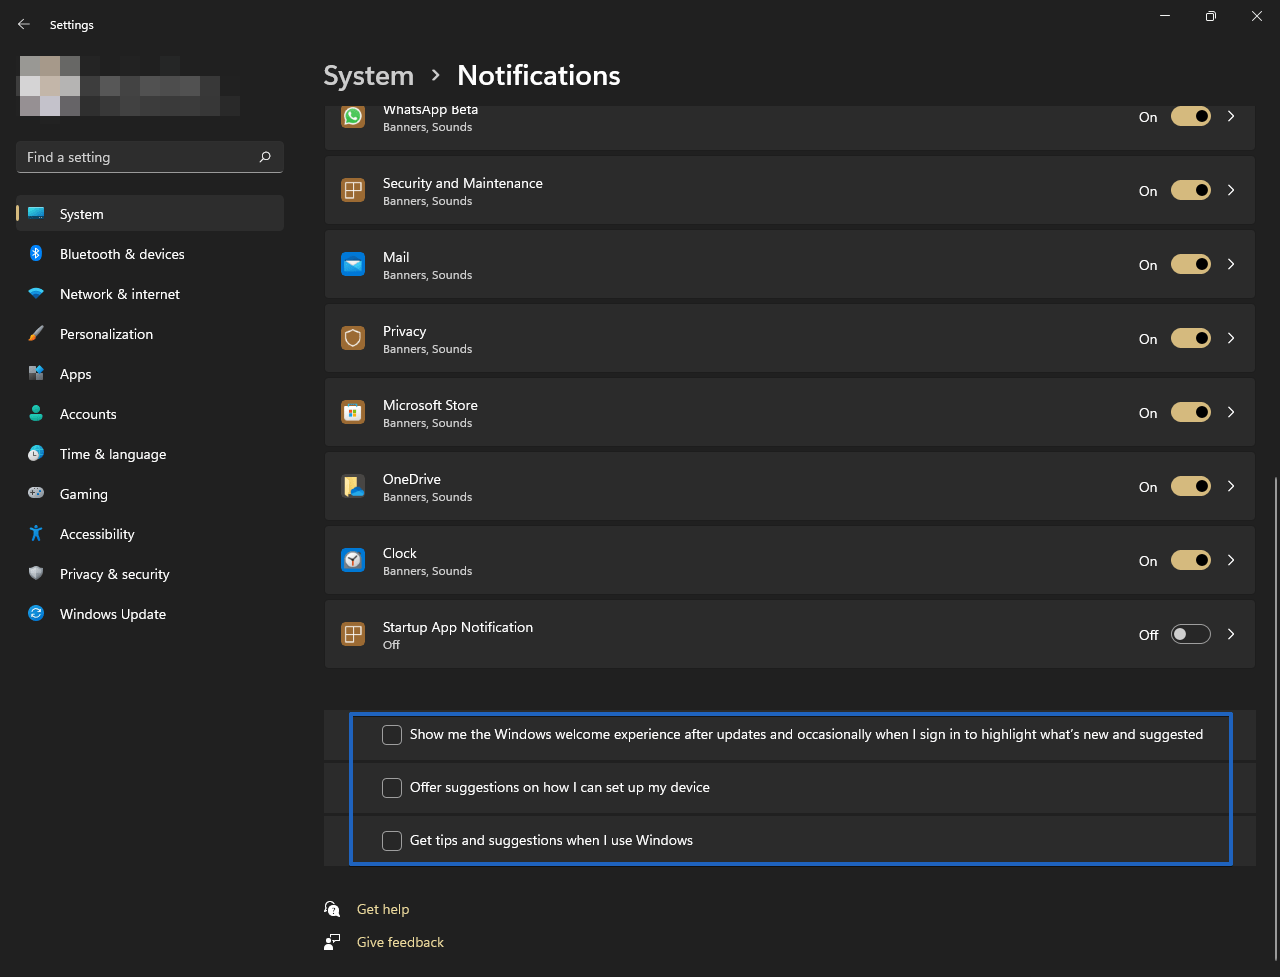 Disable or remove notification ads, suggestions